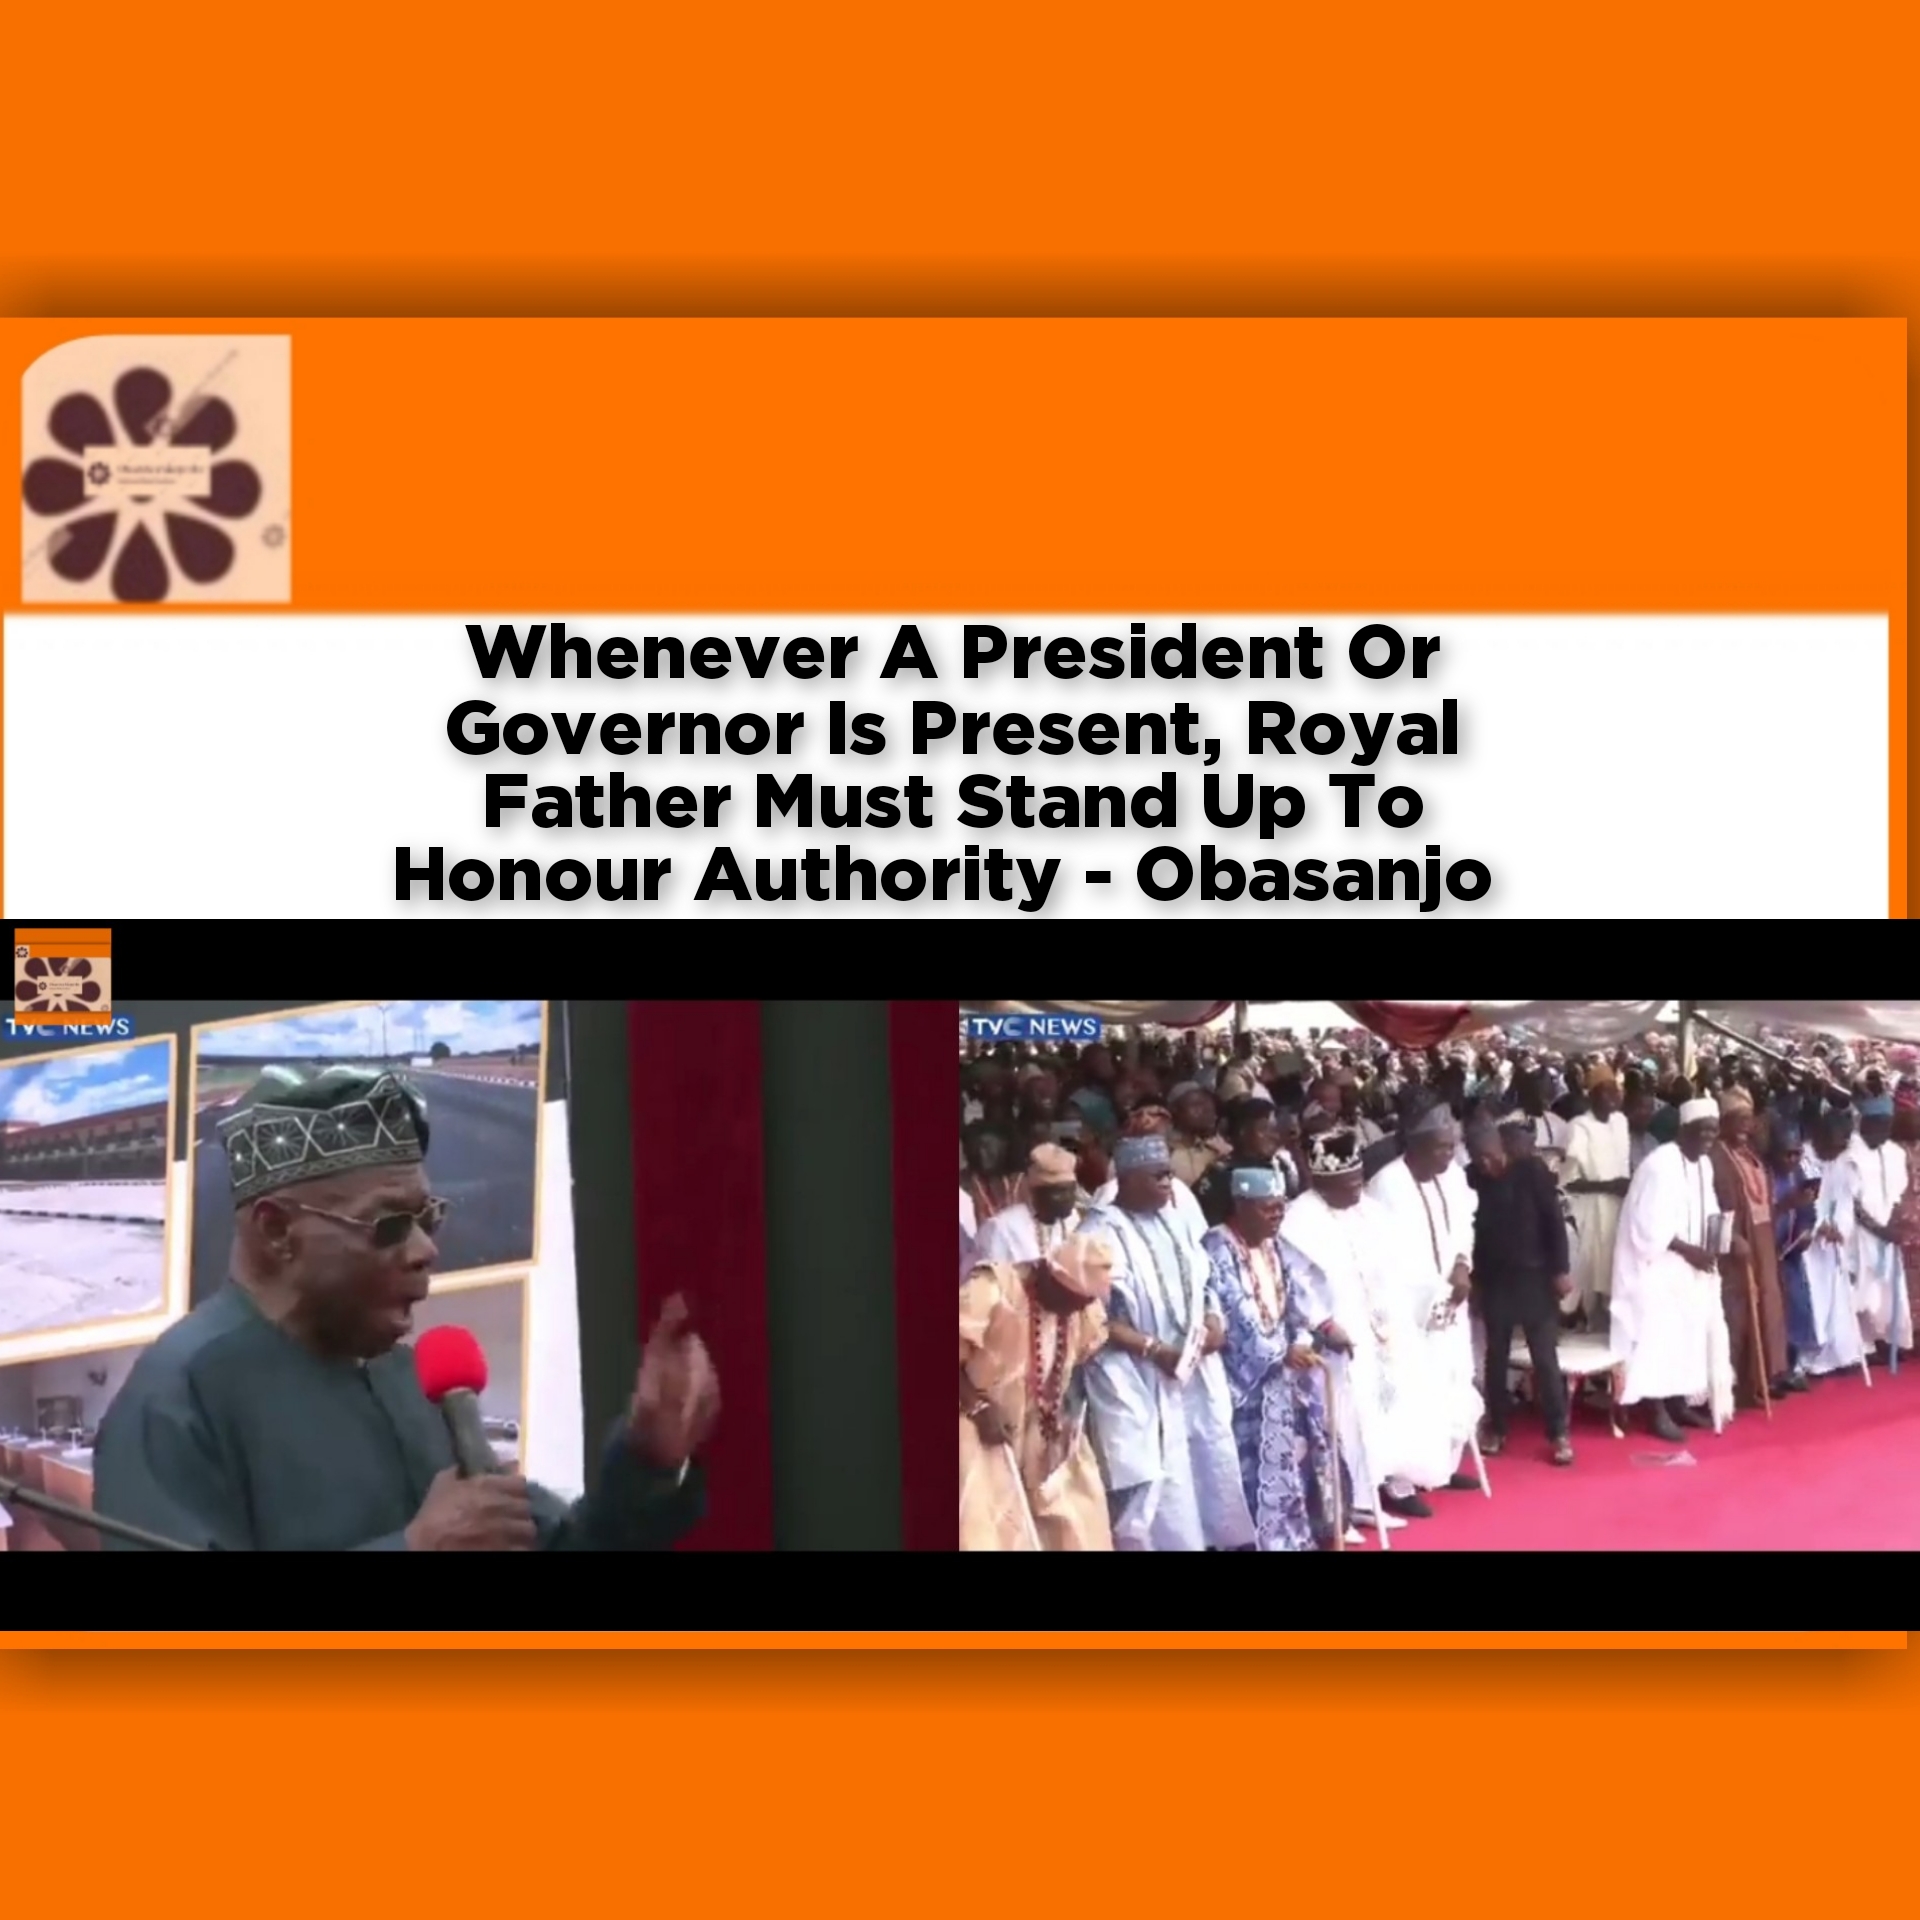 Whenever A President Or Governor Is Present, Royal Father Must Stand Up To Honour Authority - Obasanjo ~ OsazuwaAkonedo #Wike